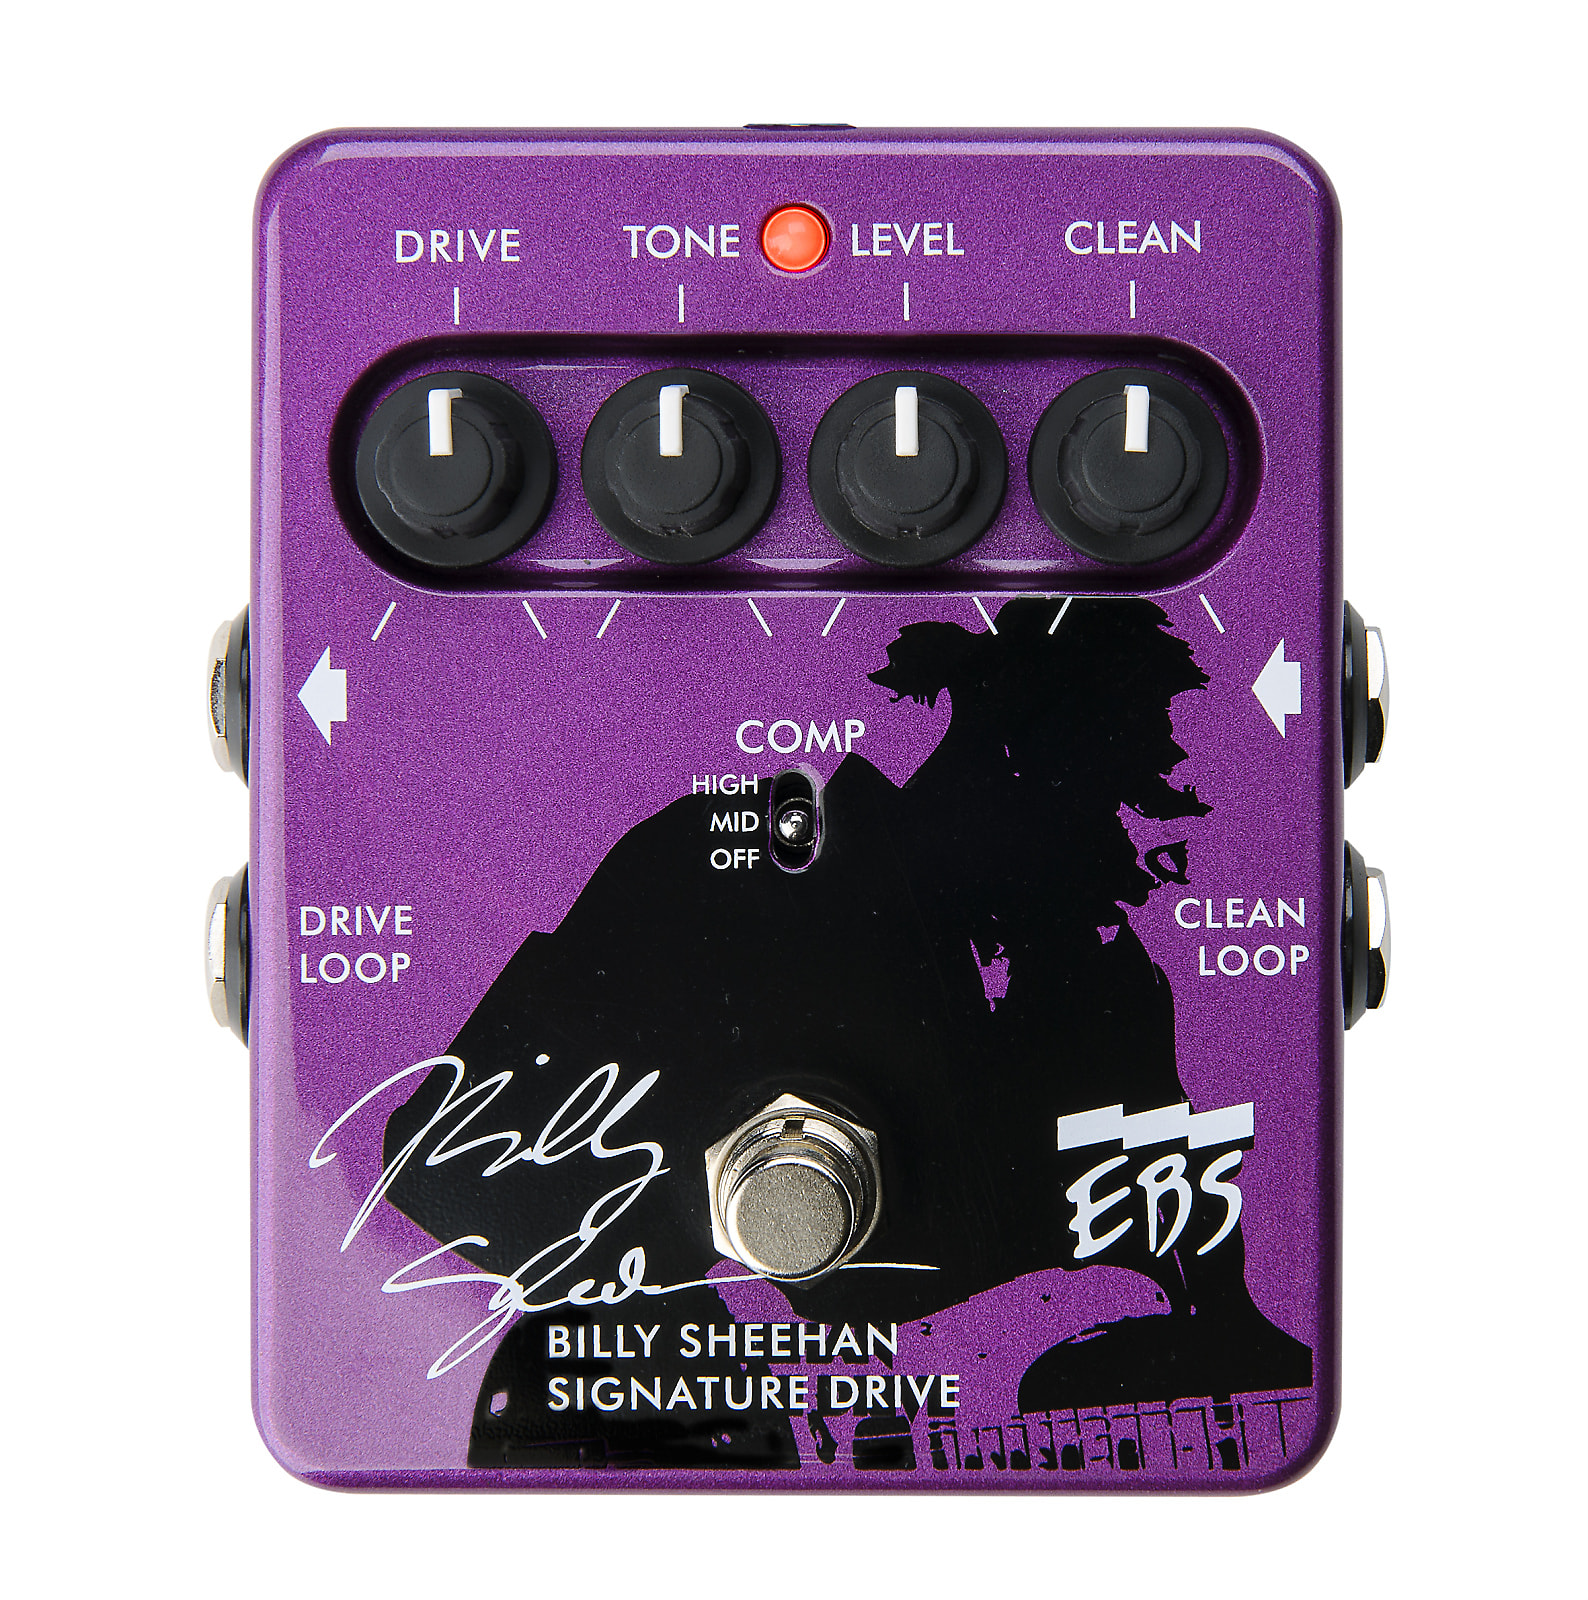 EBS Billy Sheehan Signature Drive 2015 | Reverb